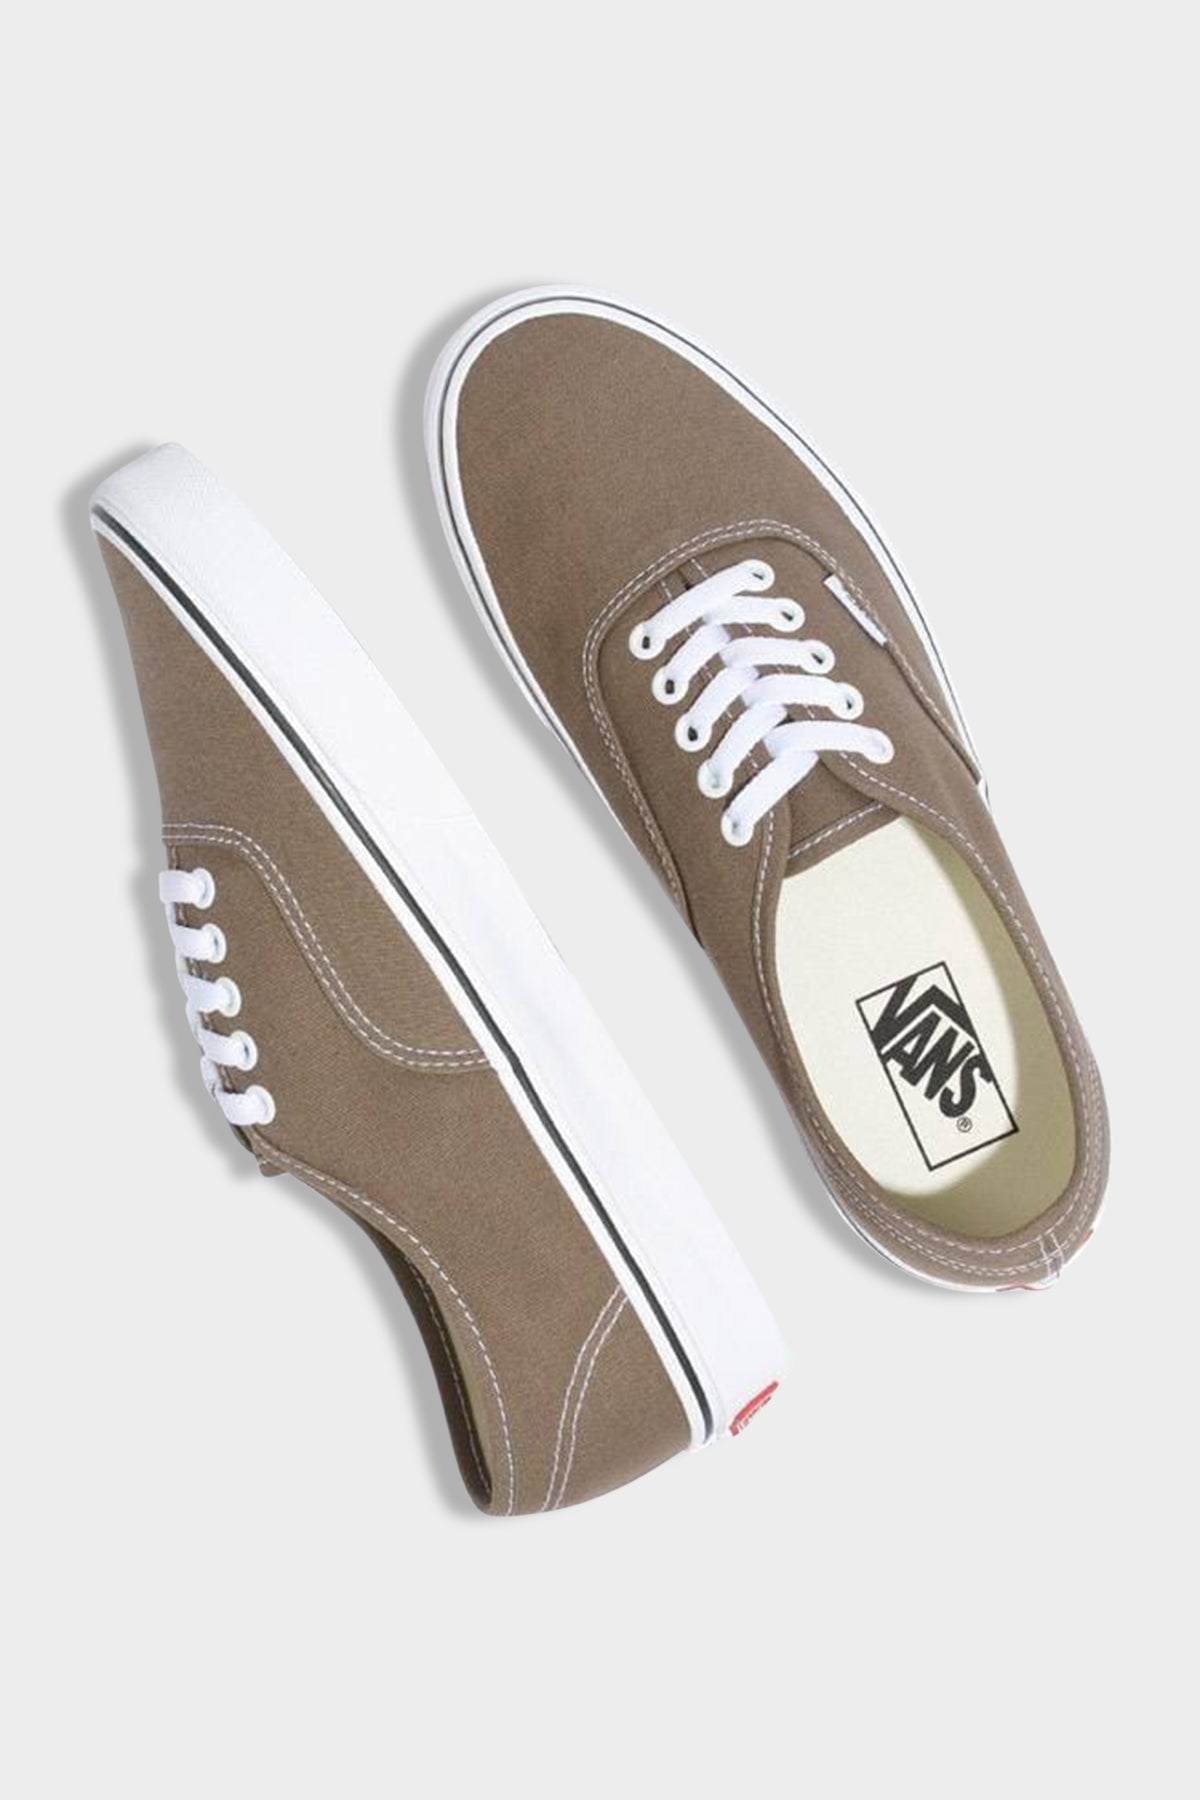 Vans Authentic Color Theory Walnut